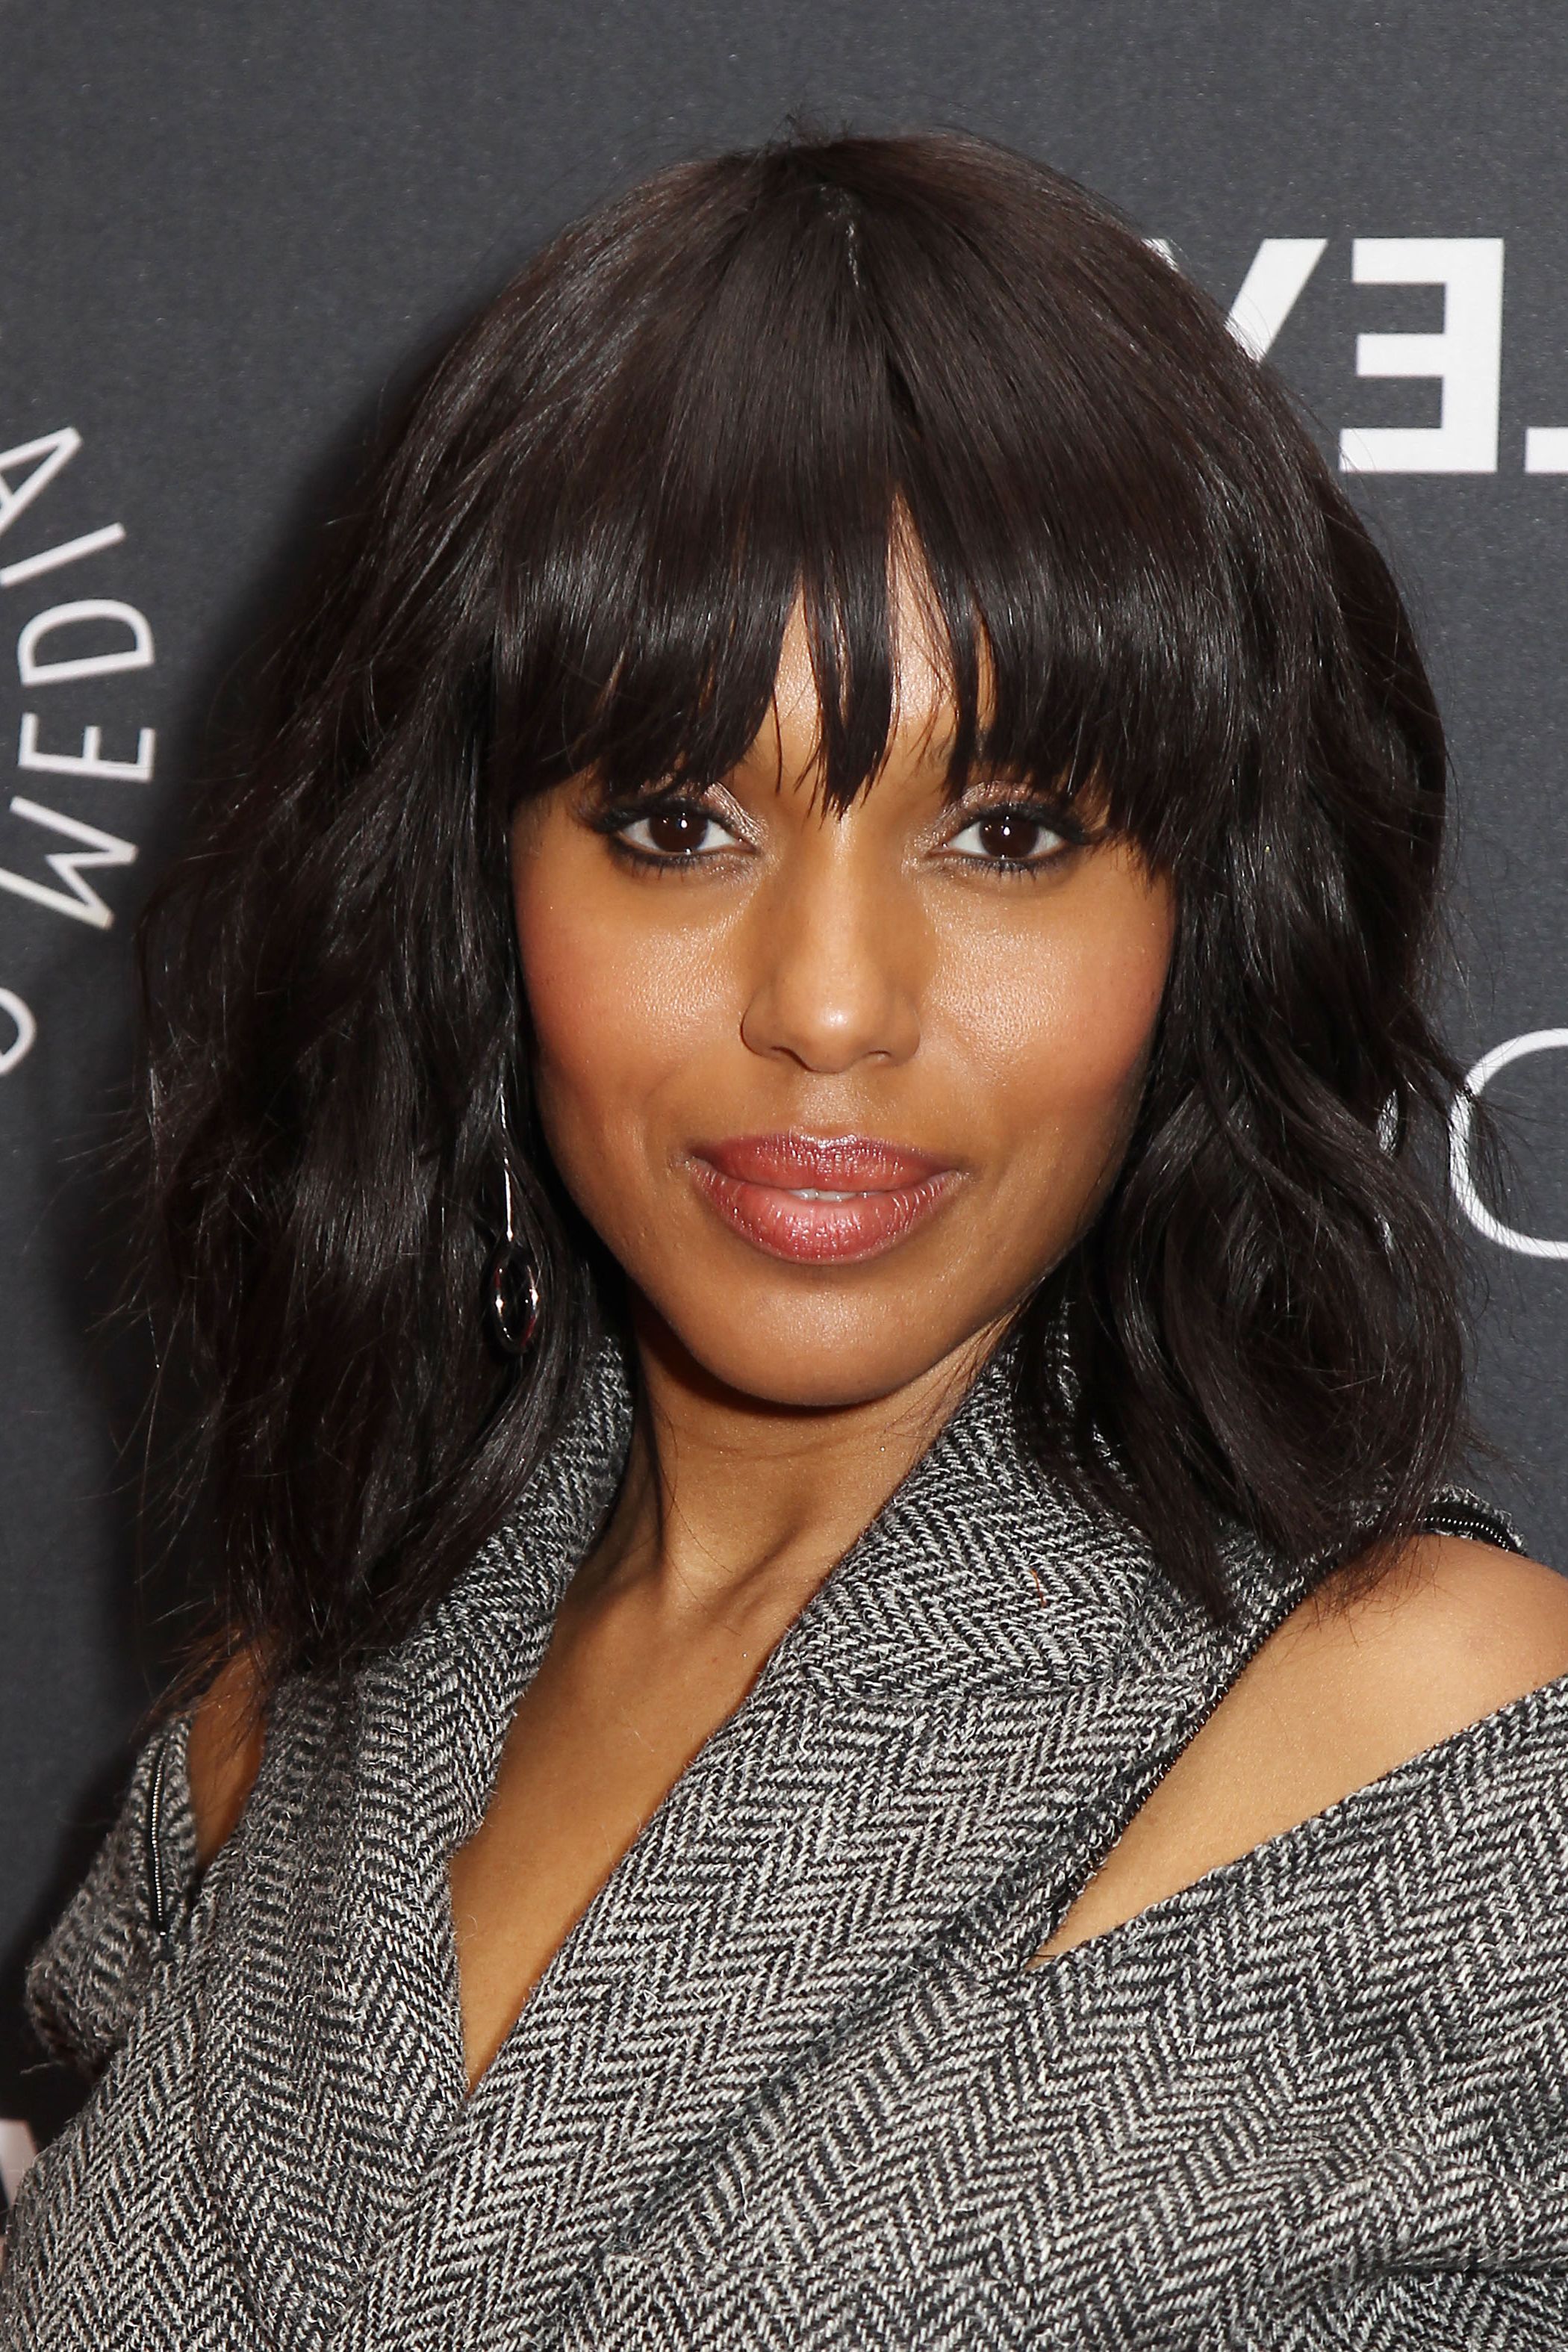 Preferred Shaggy Lob With Arched Bangs Regarding Wavy Hair With Bangs: 7 Star Studded Looks To Try Now (Gallery 9 of 15)